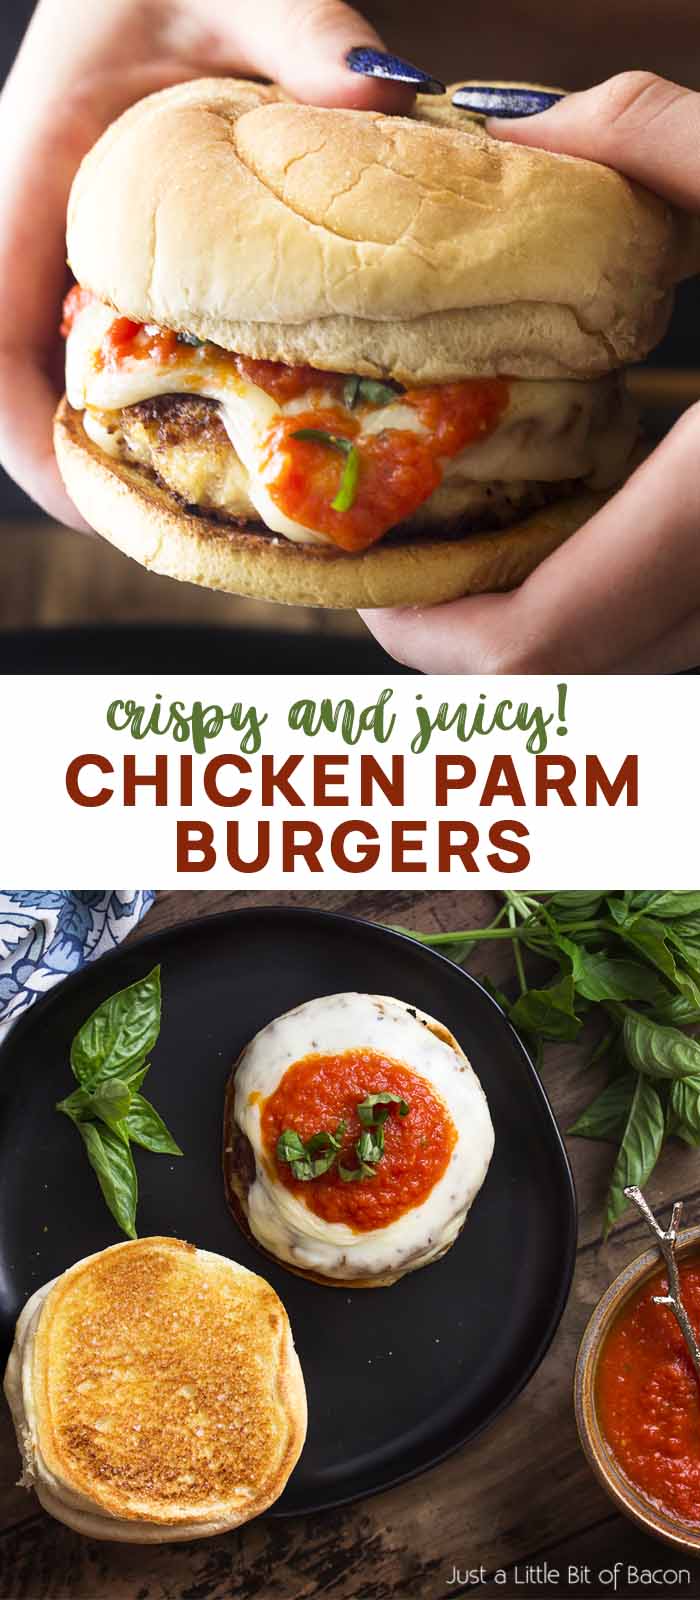 Hands holding a burger and open on a plate with text overlay - Chicken Parm Burgers.